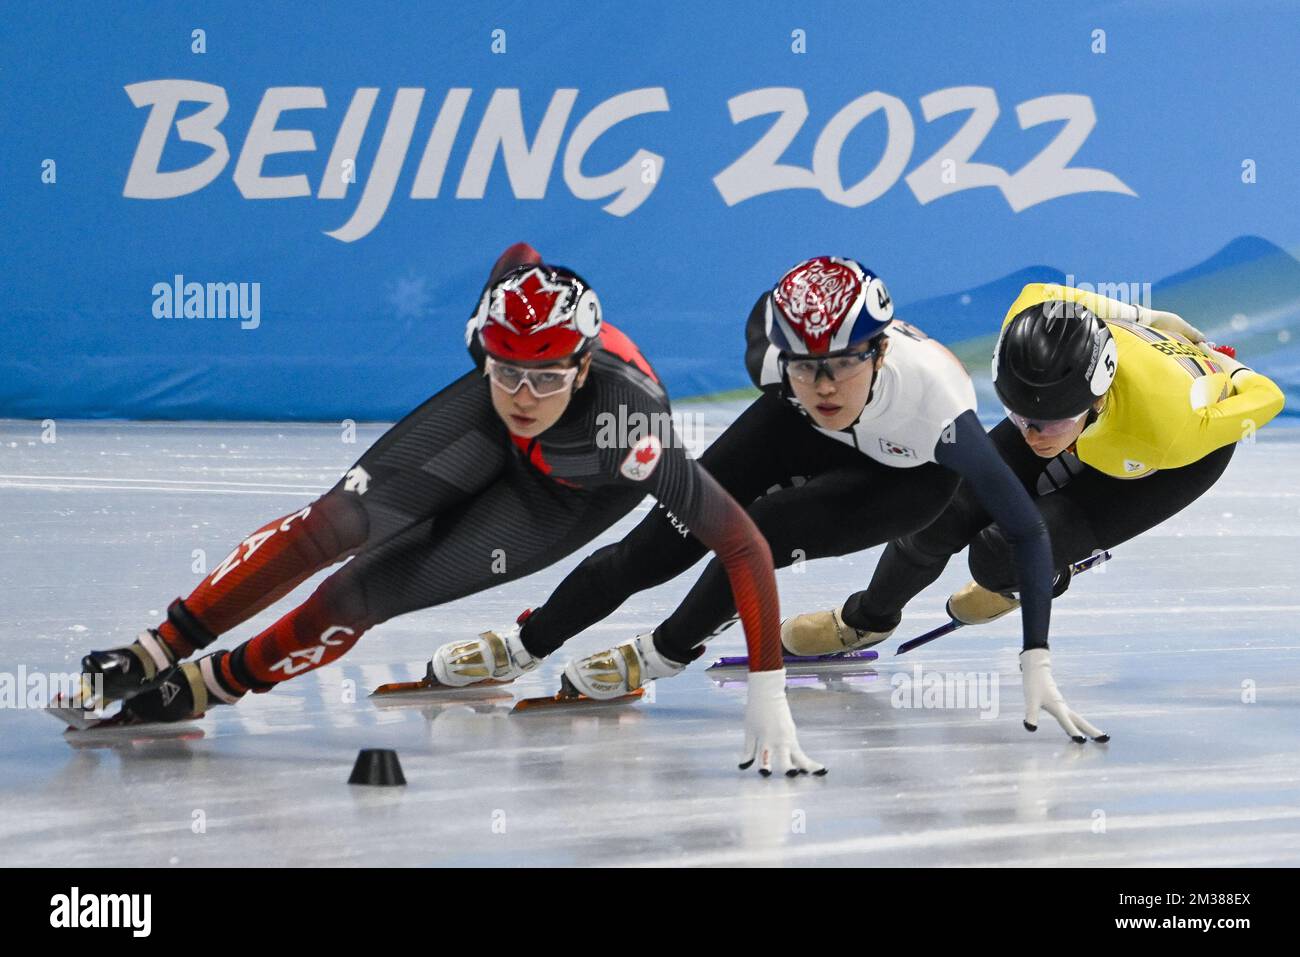 Belgian shorttrack skater Hanne Desmet pictured in action during the  women's Shorttrack 1000m qualifier at the Beijing 2022 Winter Olympics in  Beijing, China, Wednesday 09 February 2022. The winter Olympics are taking